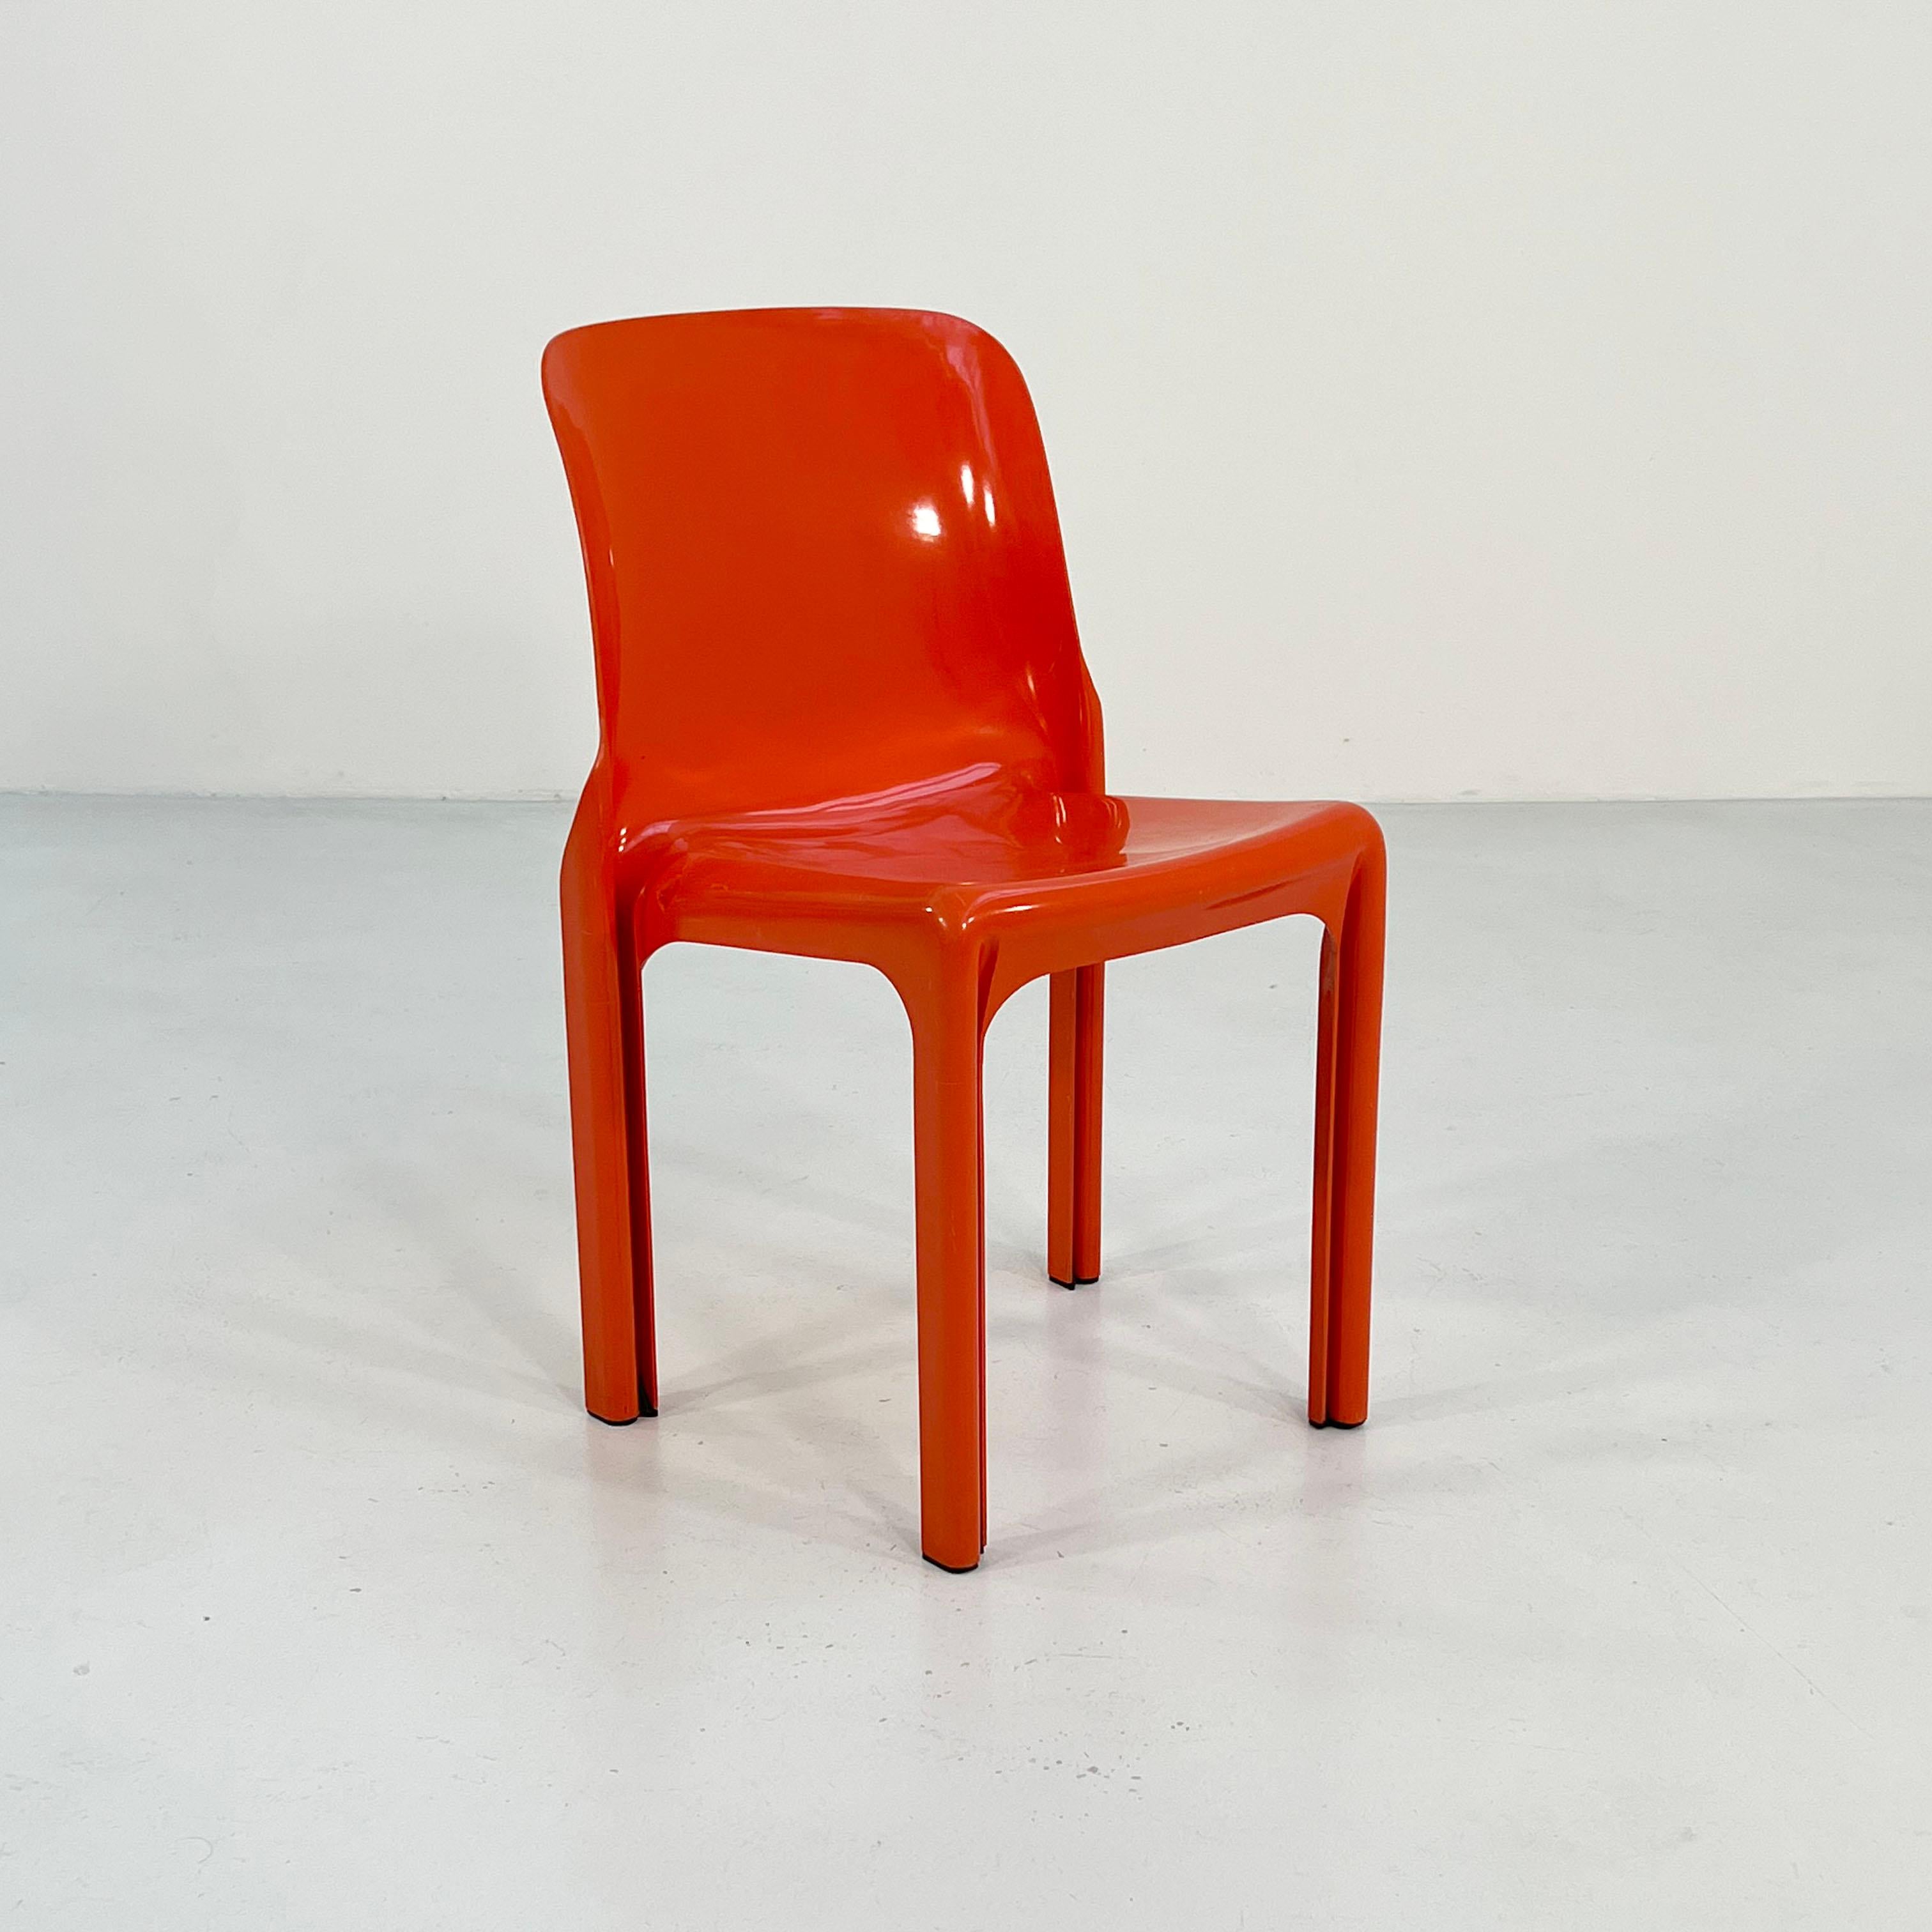 Designer - Vico Magistretti
Producer - Artemide
Model - Selene Chair
Design Period - Seventies
Measurements - Width 47 cm x Depth 50 cm x Height 76 cm x Seat Height 48 cm
Materials - Plastic
Color - Orange
Light wear consistent with age and use.